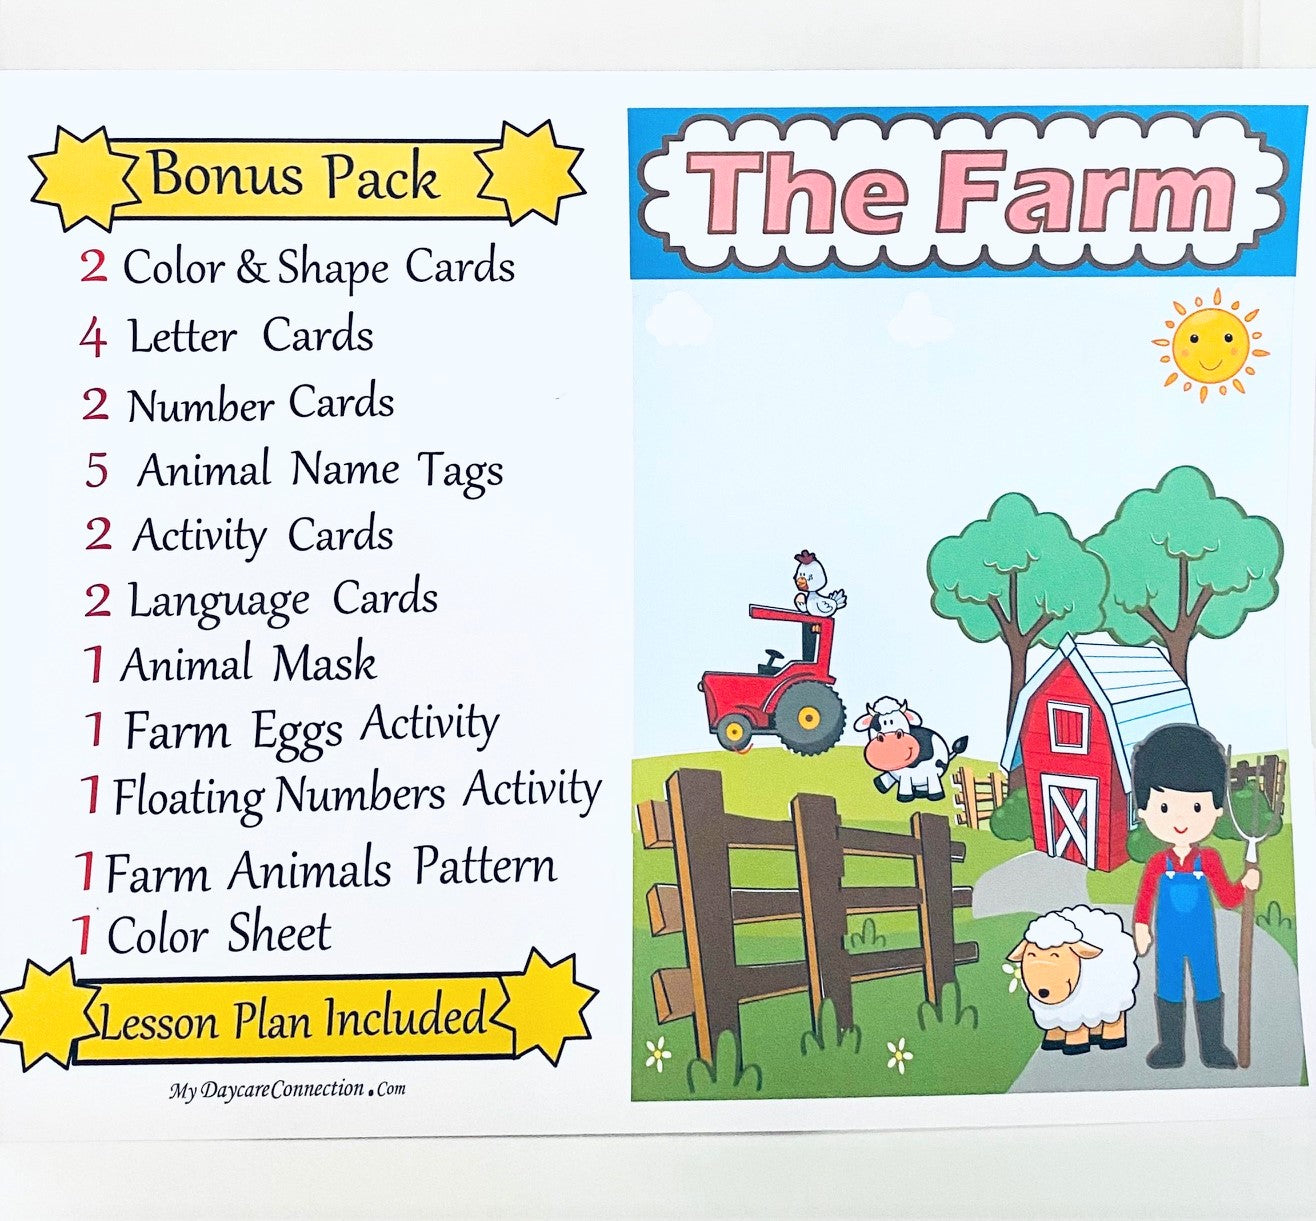 The Farm – My Daycare Connection